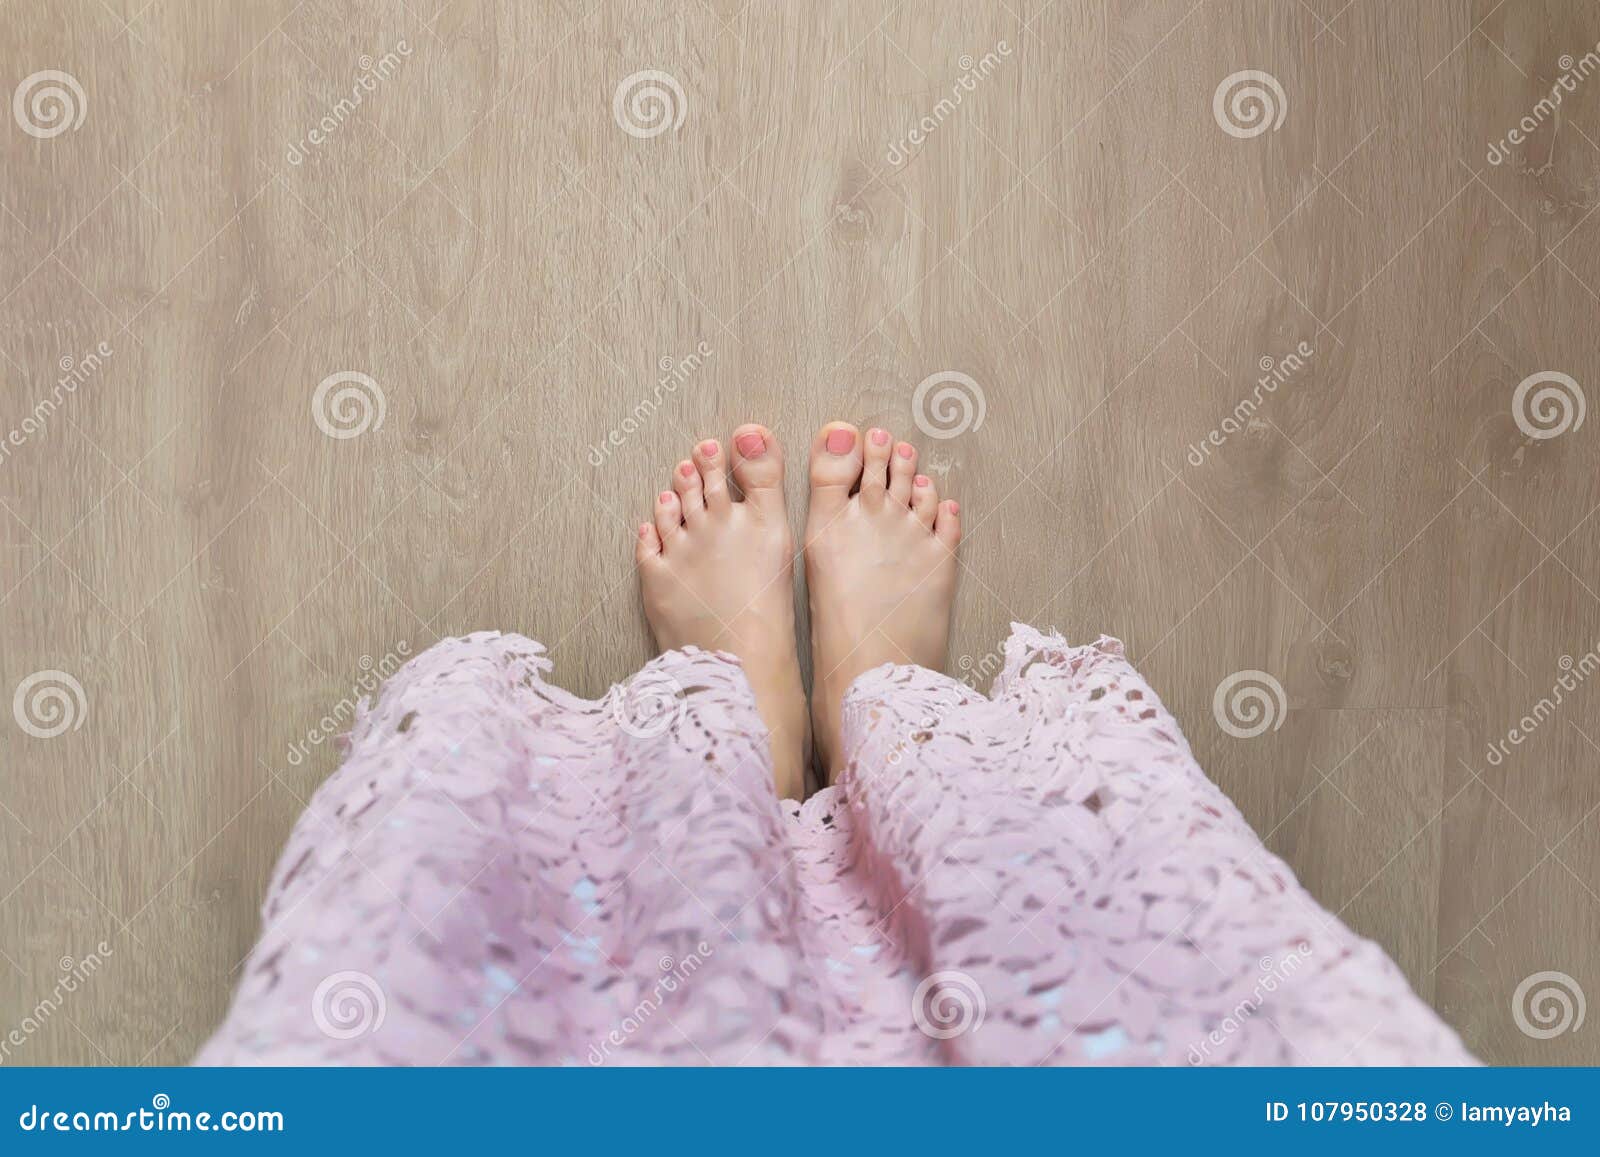 Female Barefoot Legs With Classic Red Pedicure Woman Raise Her Feet Up